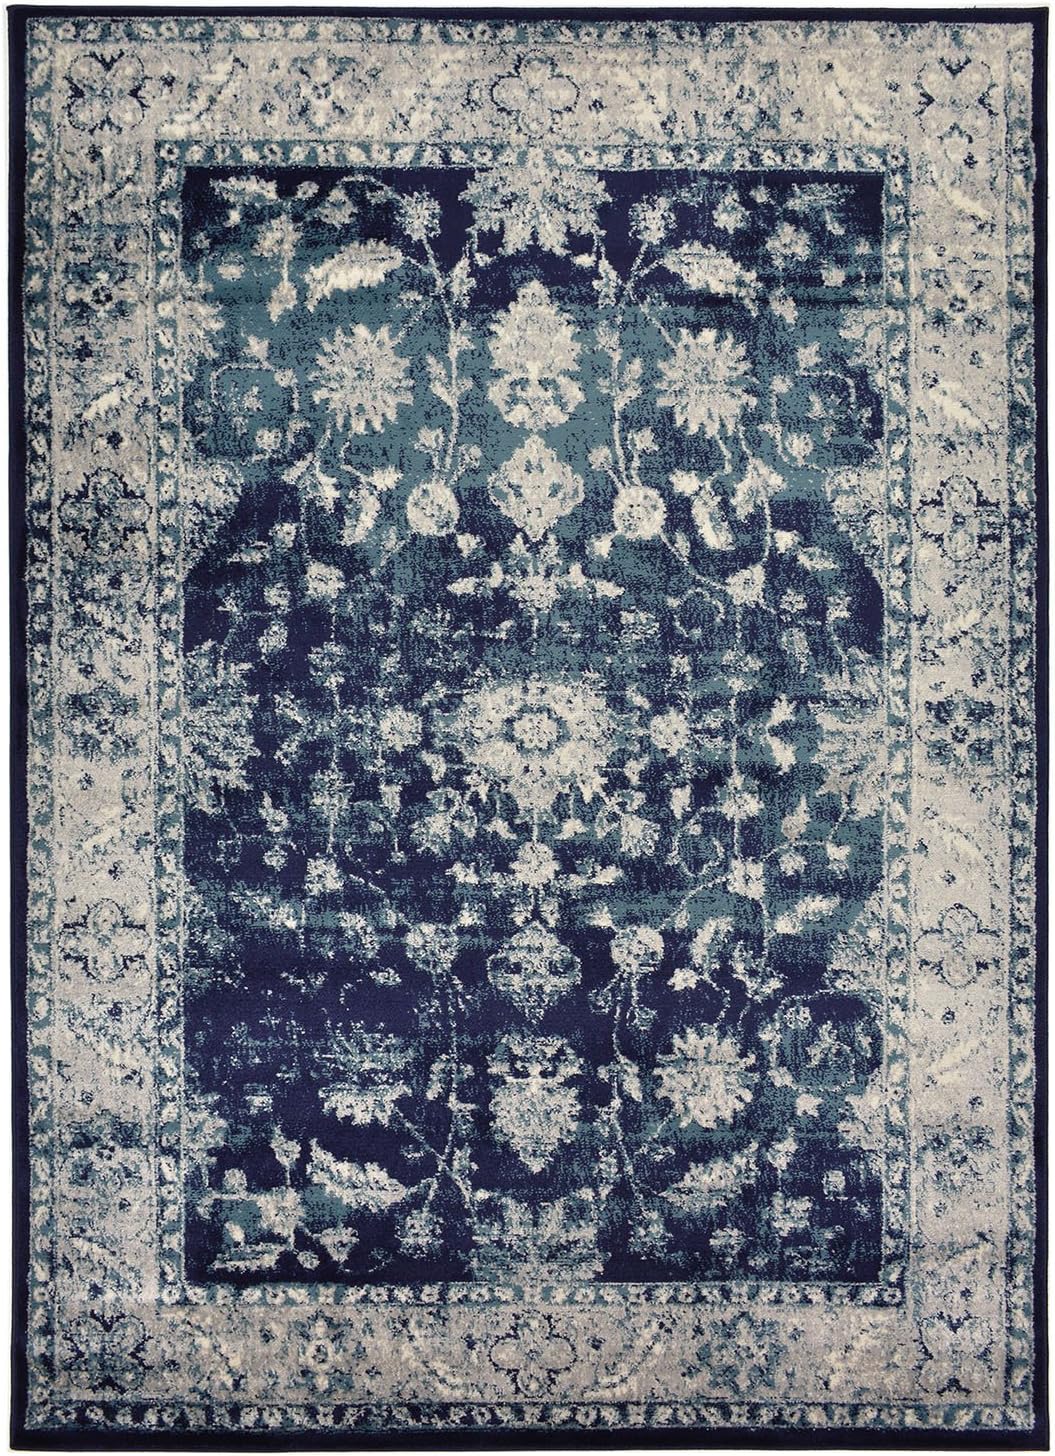 Studio Collection Vintage Mahal Allover Design Traditional Persian Area Rug (Mahal Navy Blue, 5 x 7)-1